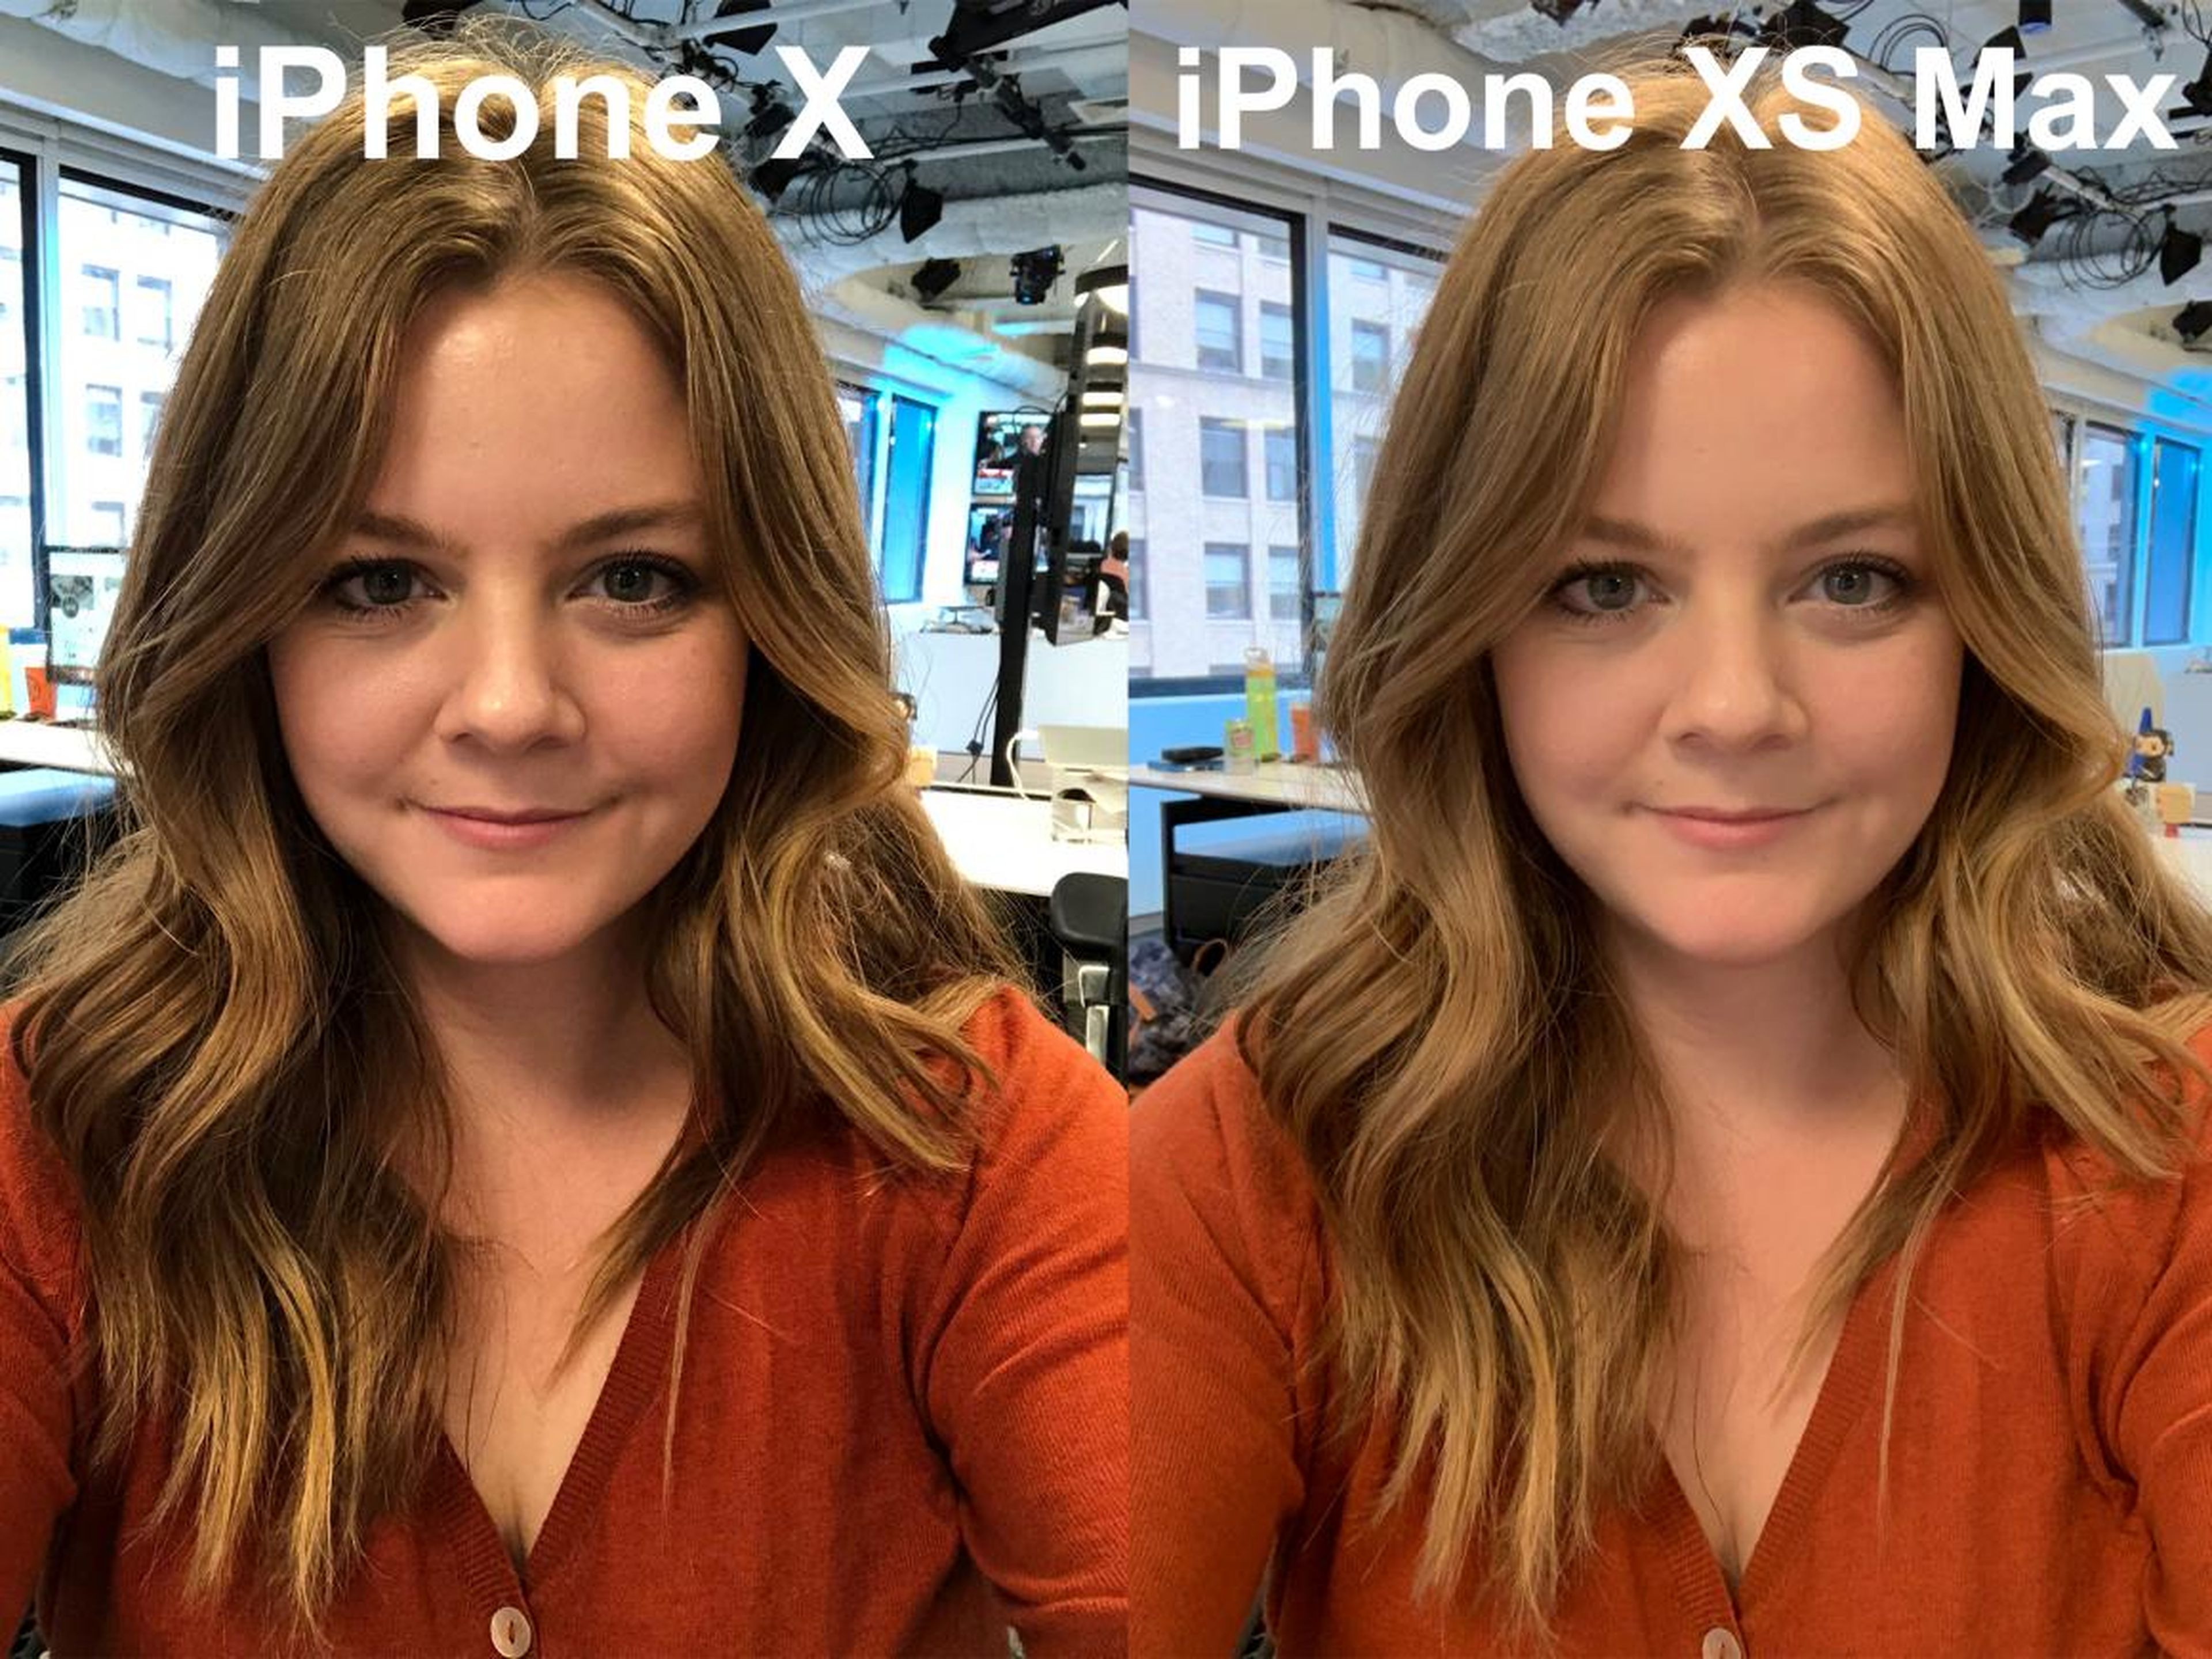 In indoor office lighting, the iPhone XS Max undoubtedly smoothed out the face of my colleague Avery Hartmans. Shadows were also reduced, which could be a result of the new Smart HDR feature in the iPhone XS phones.